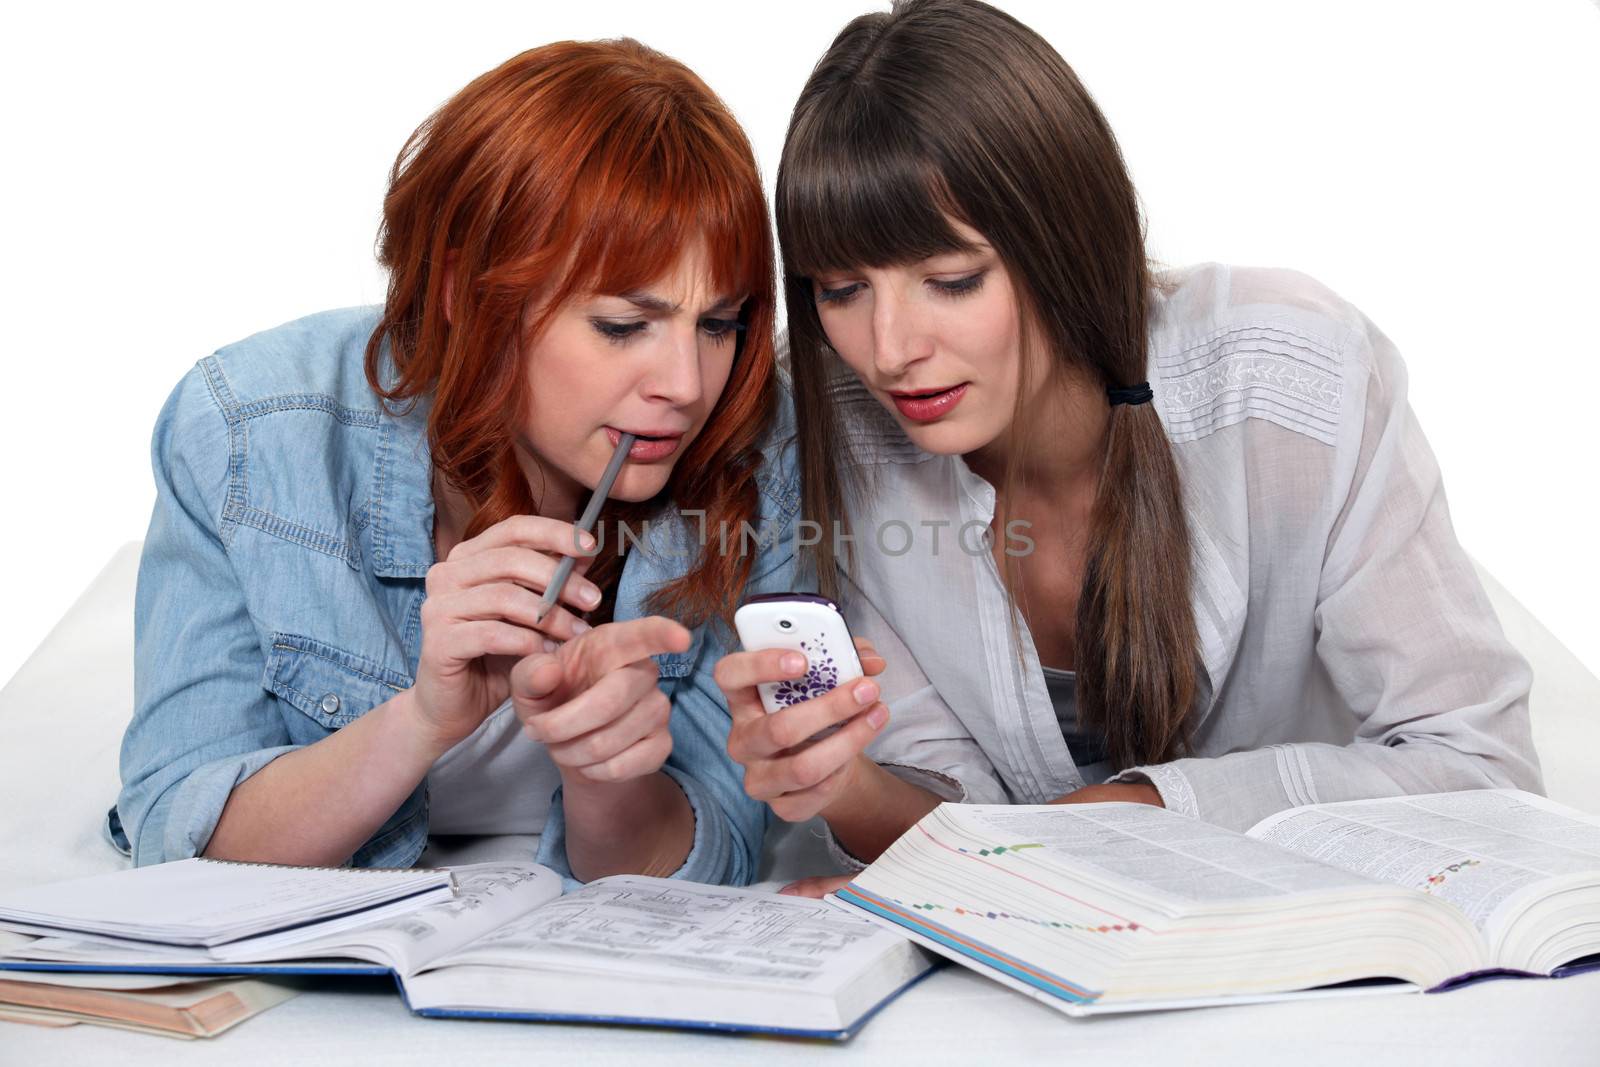 Girls looking at a cellphone while doing their homework by phovoir